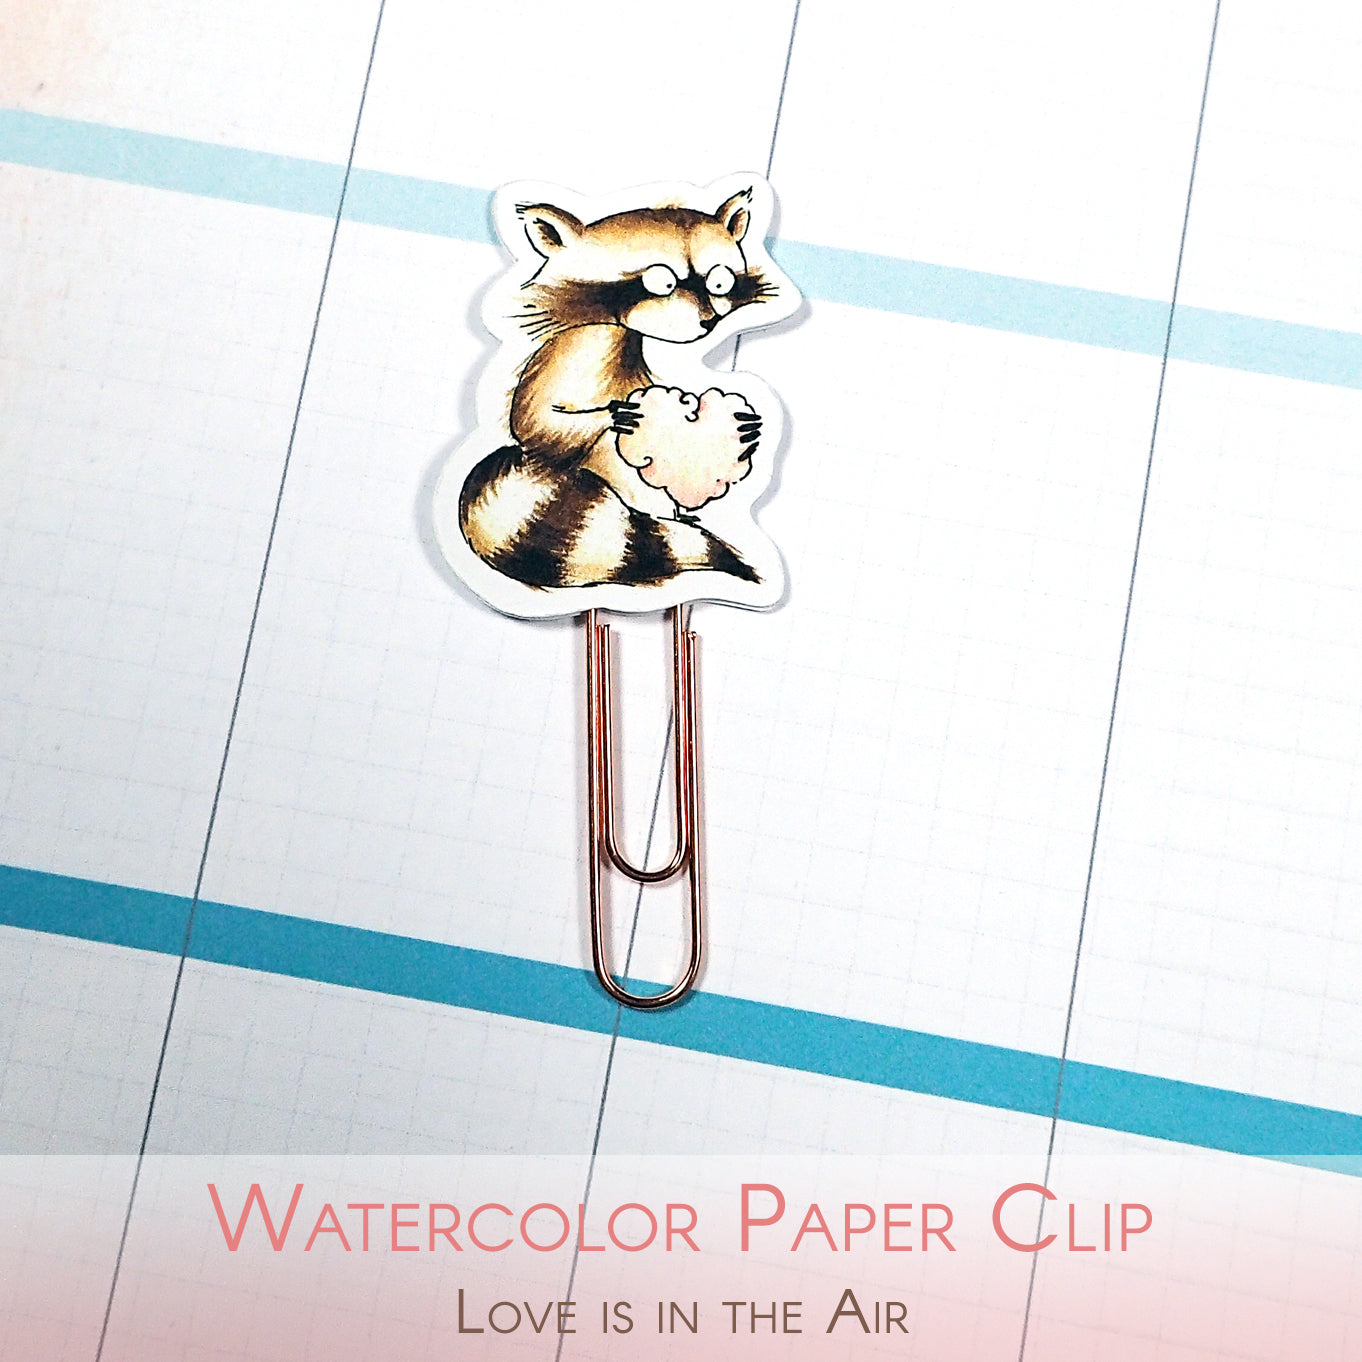 Watercolor paper clip with raccoon